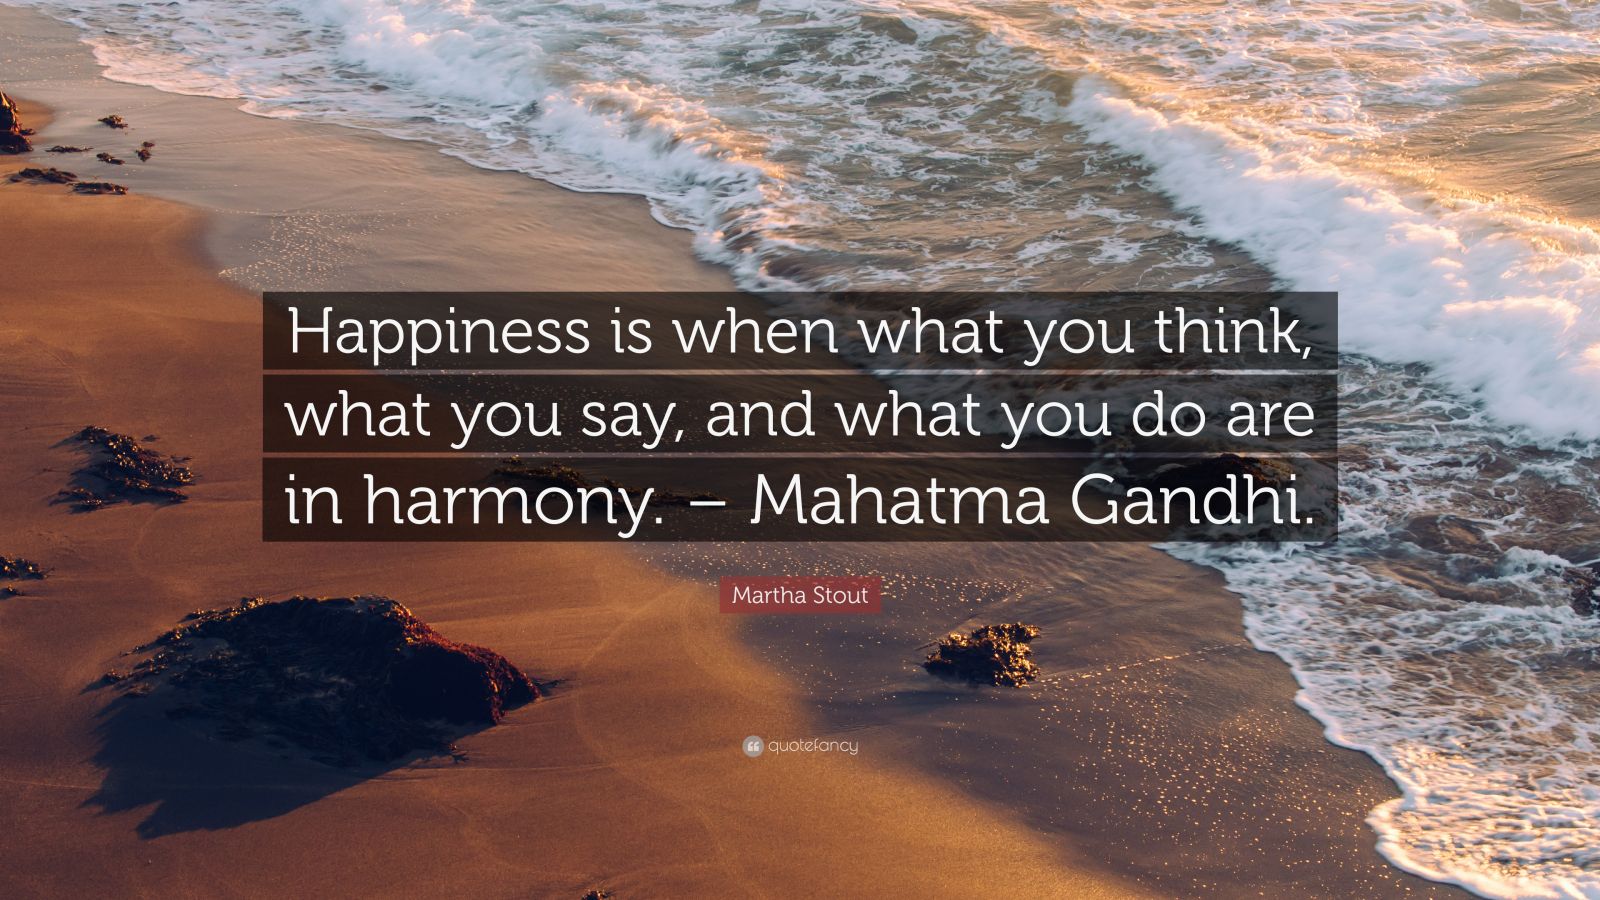 Martha Stout Quote: “Happiness is when what you think, what you say ...